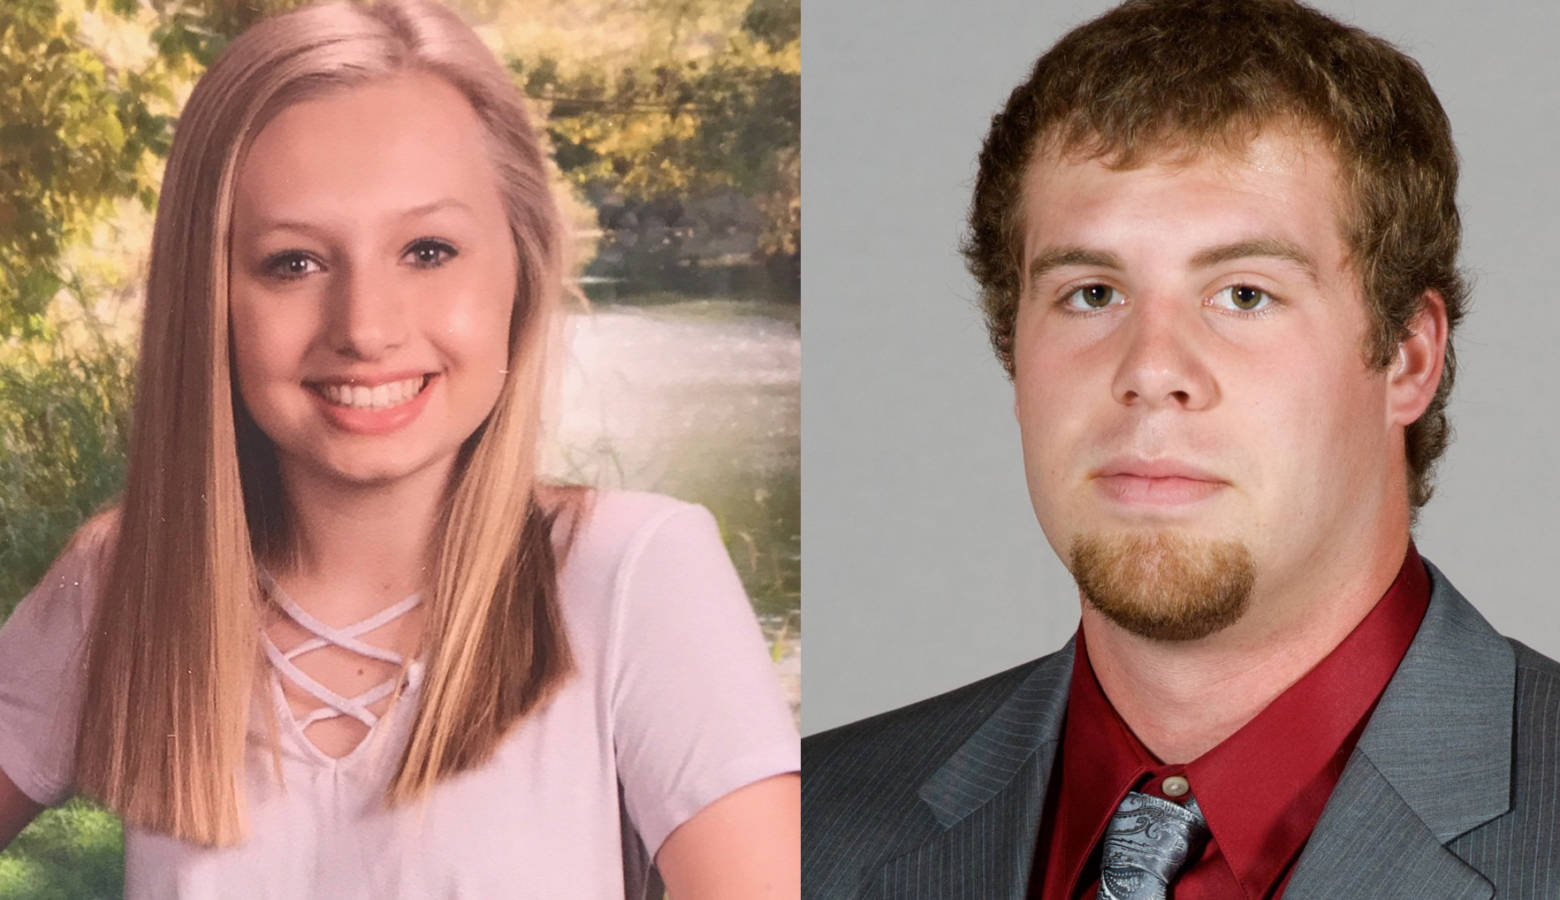 Ella Whistler, left, and Jason Seaman were injured in the Noblesville West Middle School shooting (Provided by Whistler family and Southern Illinois University)